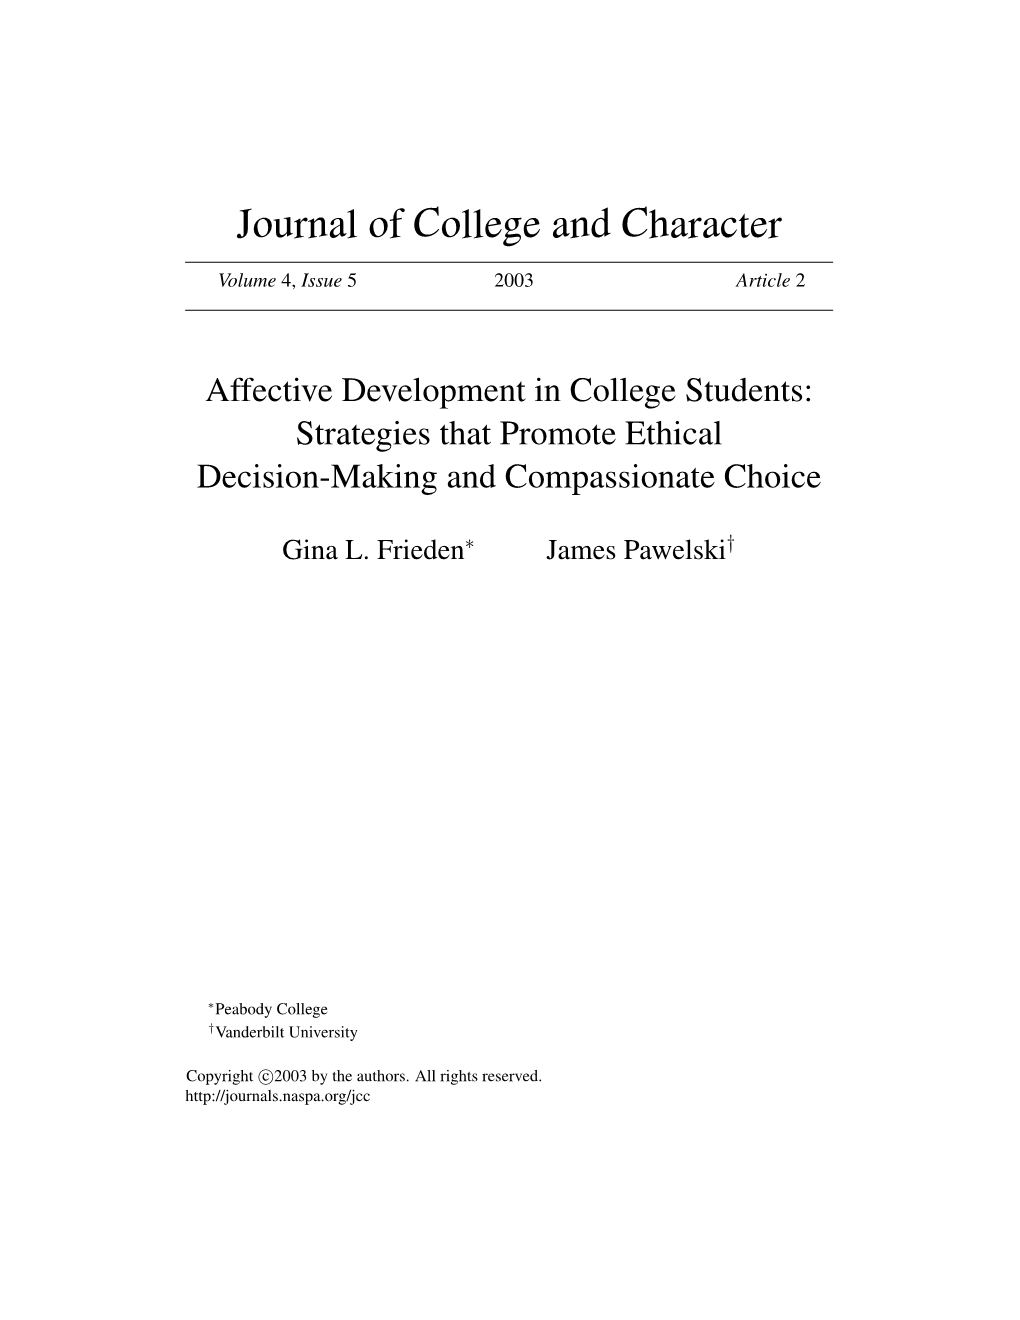 Affective Development in College Students: Strategies That Promote Ethical Decision-Making and Compassionate Choice